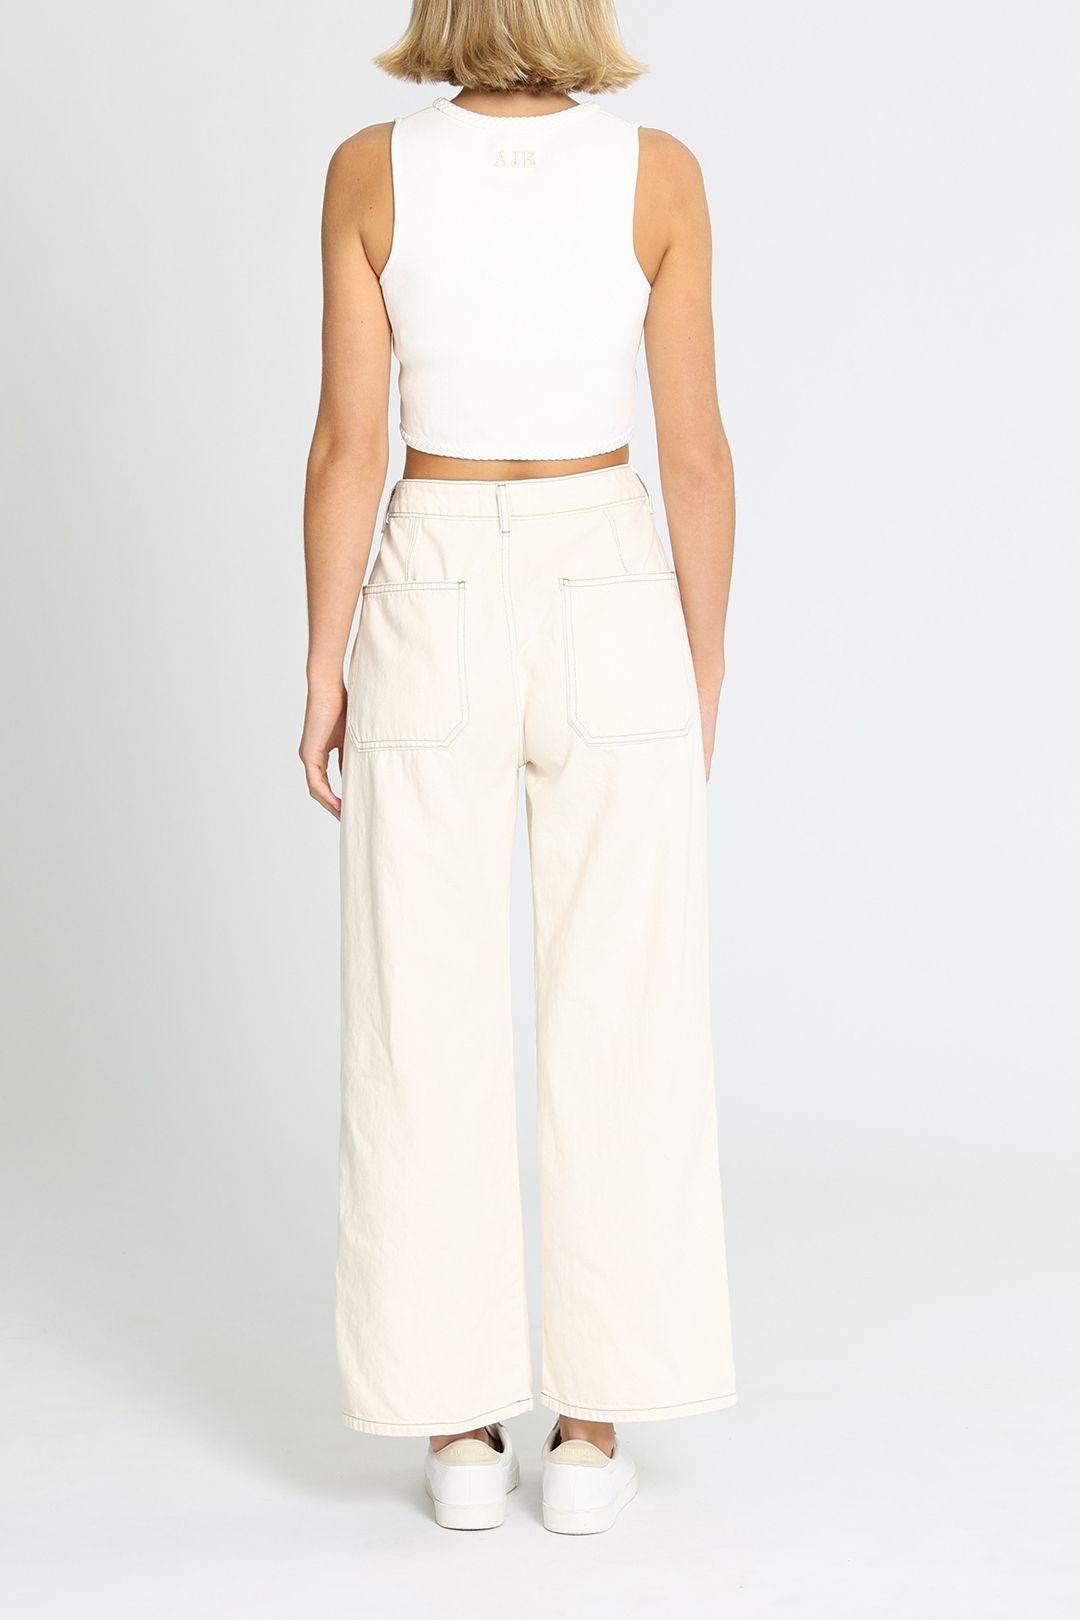 Reformation White Jeans Wide Leg